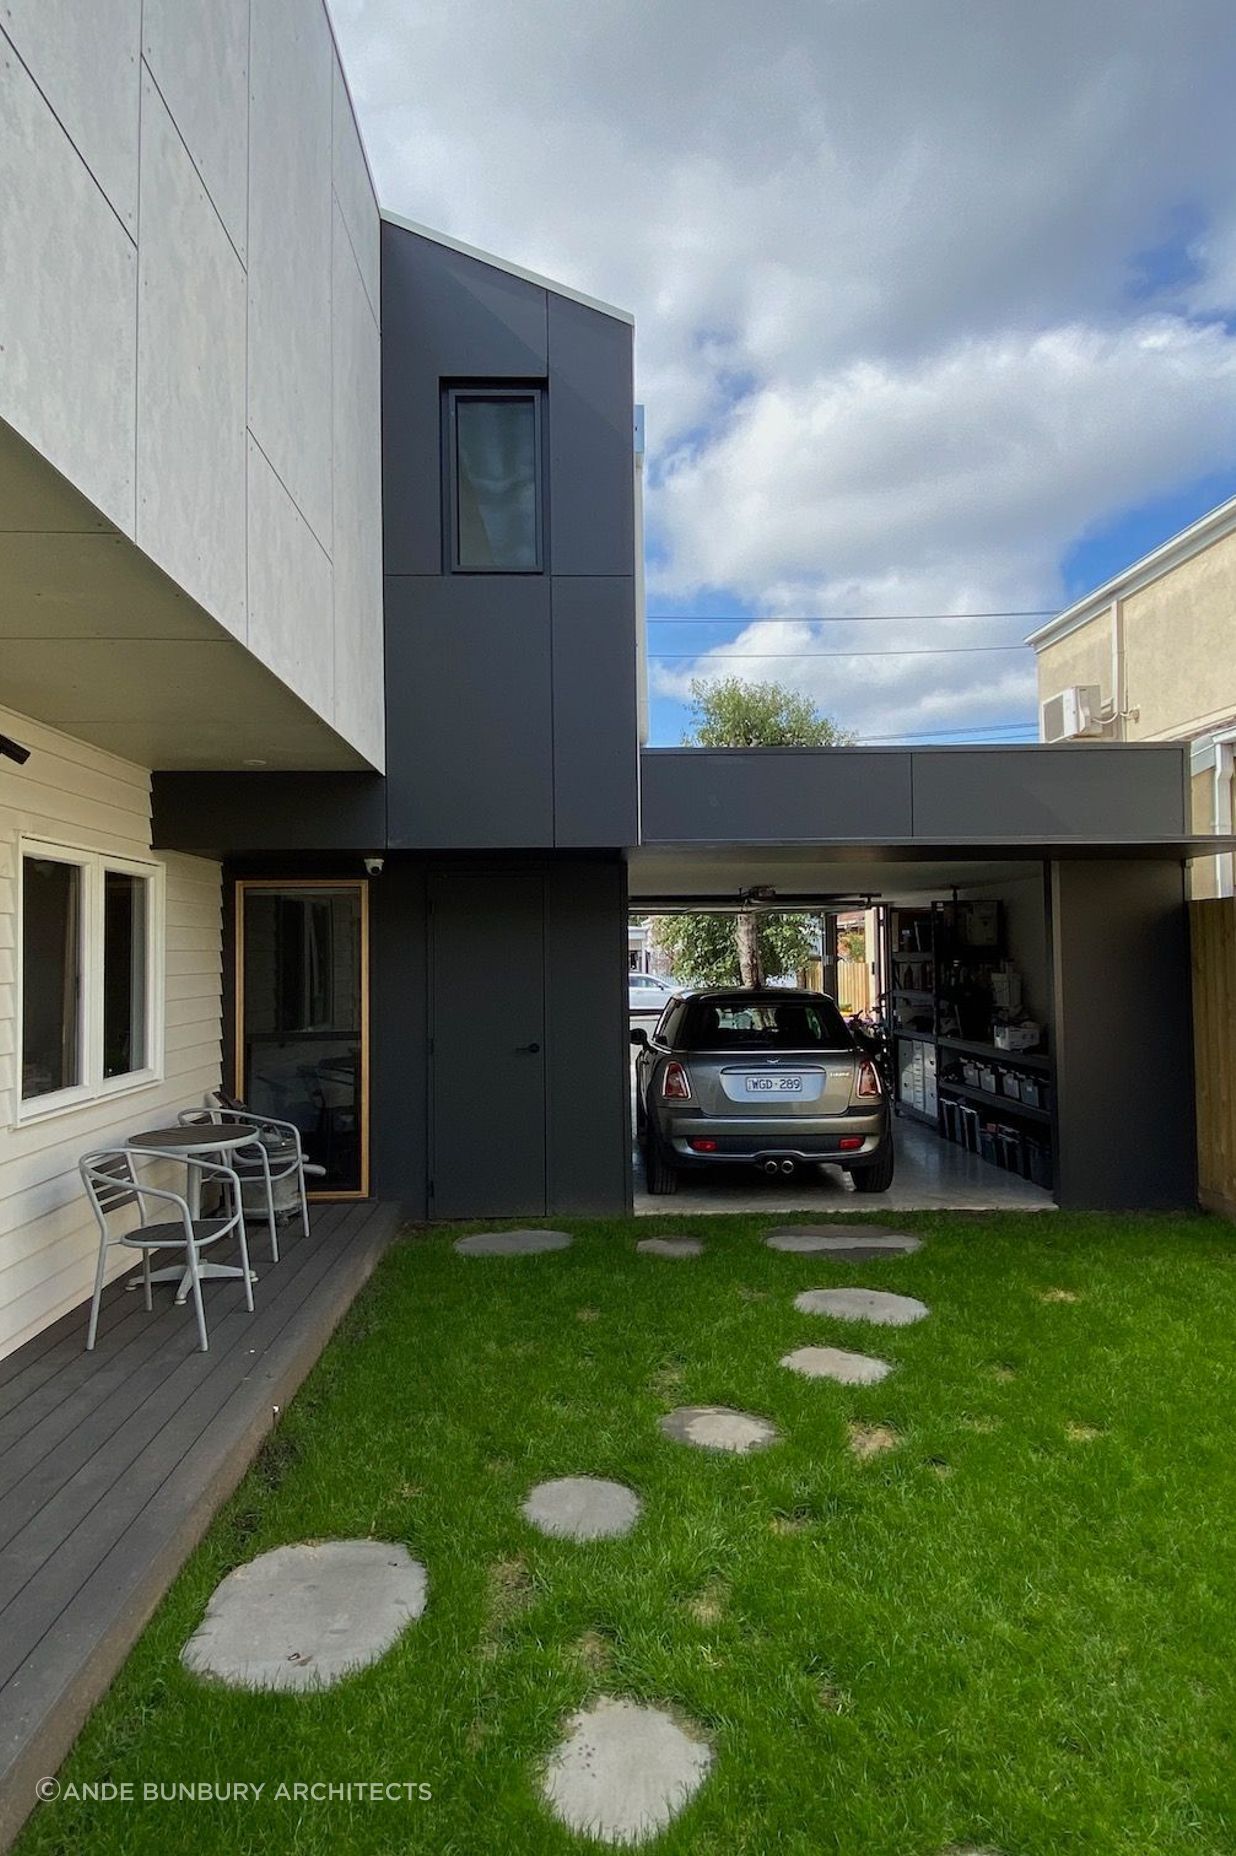 The garage provides privacy to the side garden and can be used as a space for entertaining